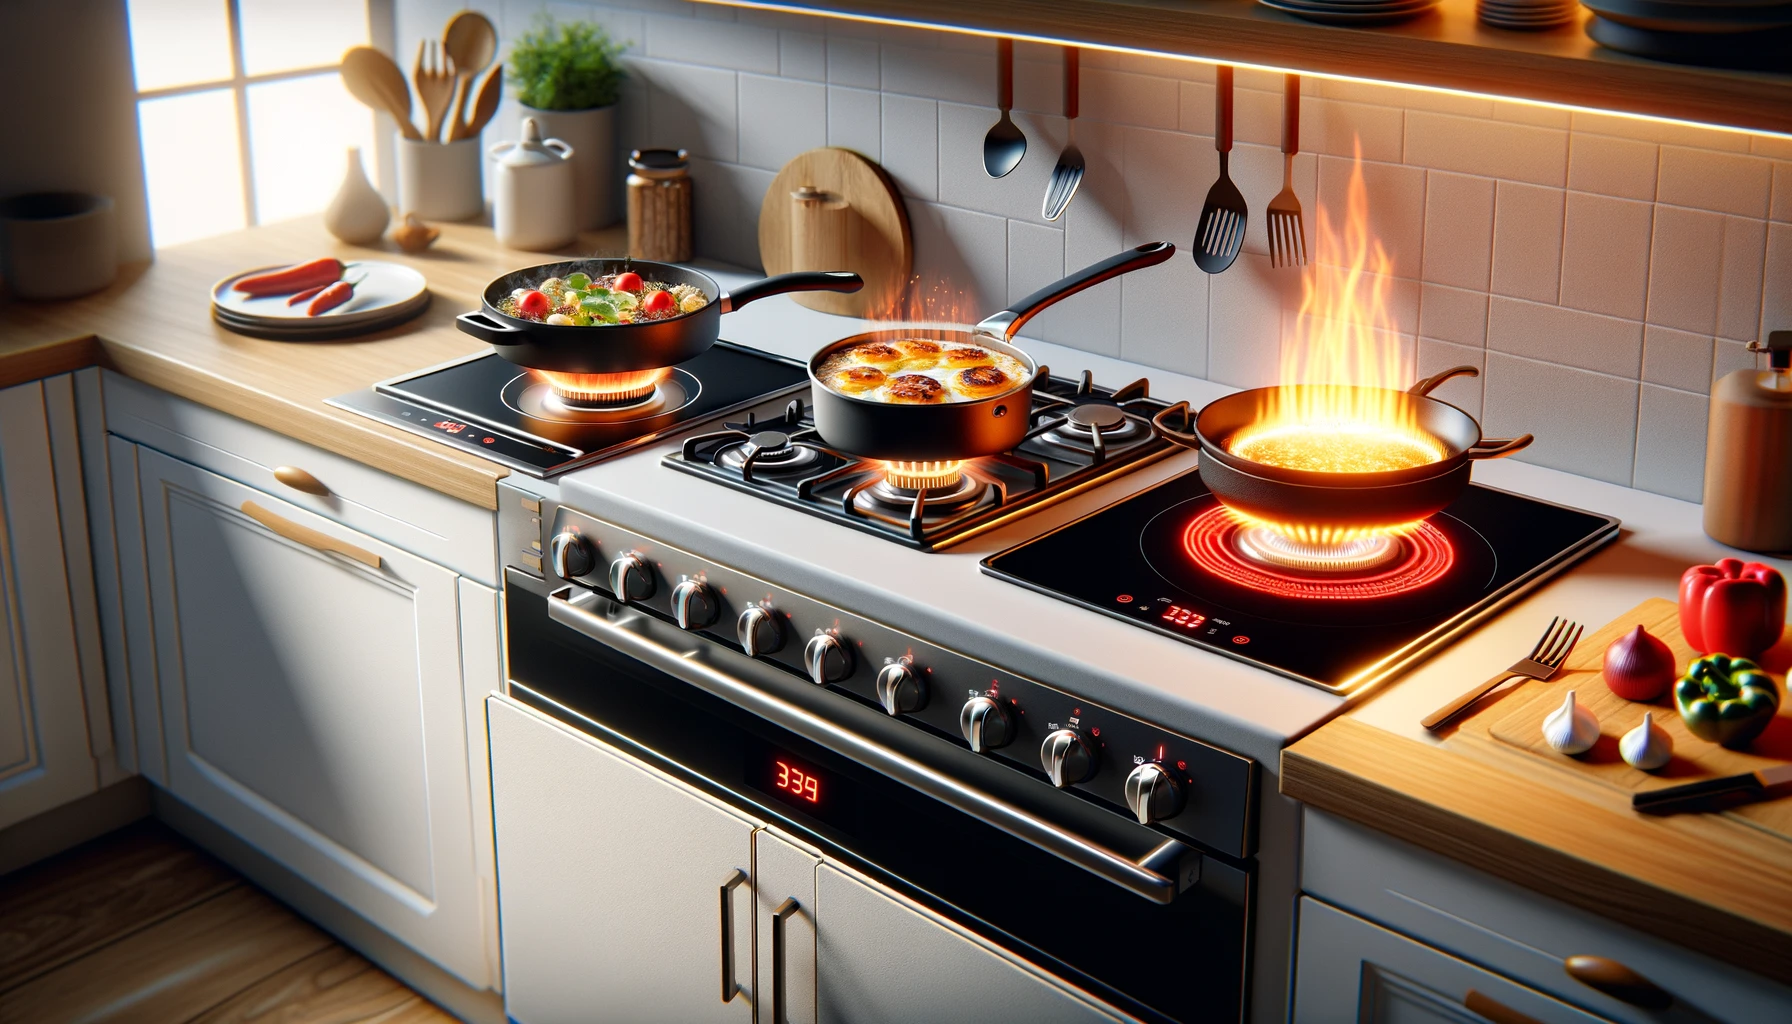 Stoves: A Comparative Look at Gas, Electric, and Induction